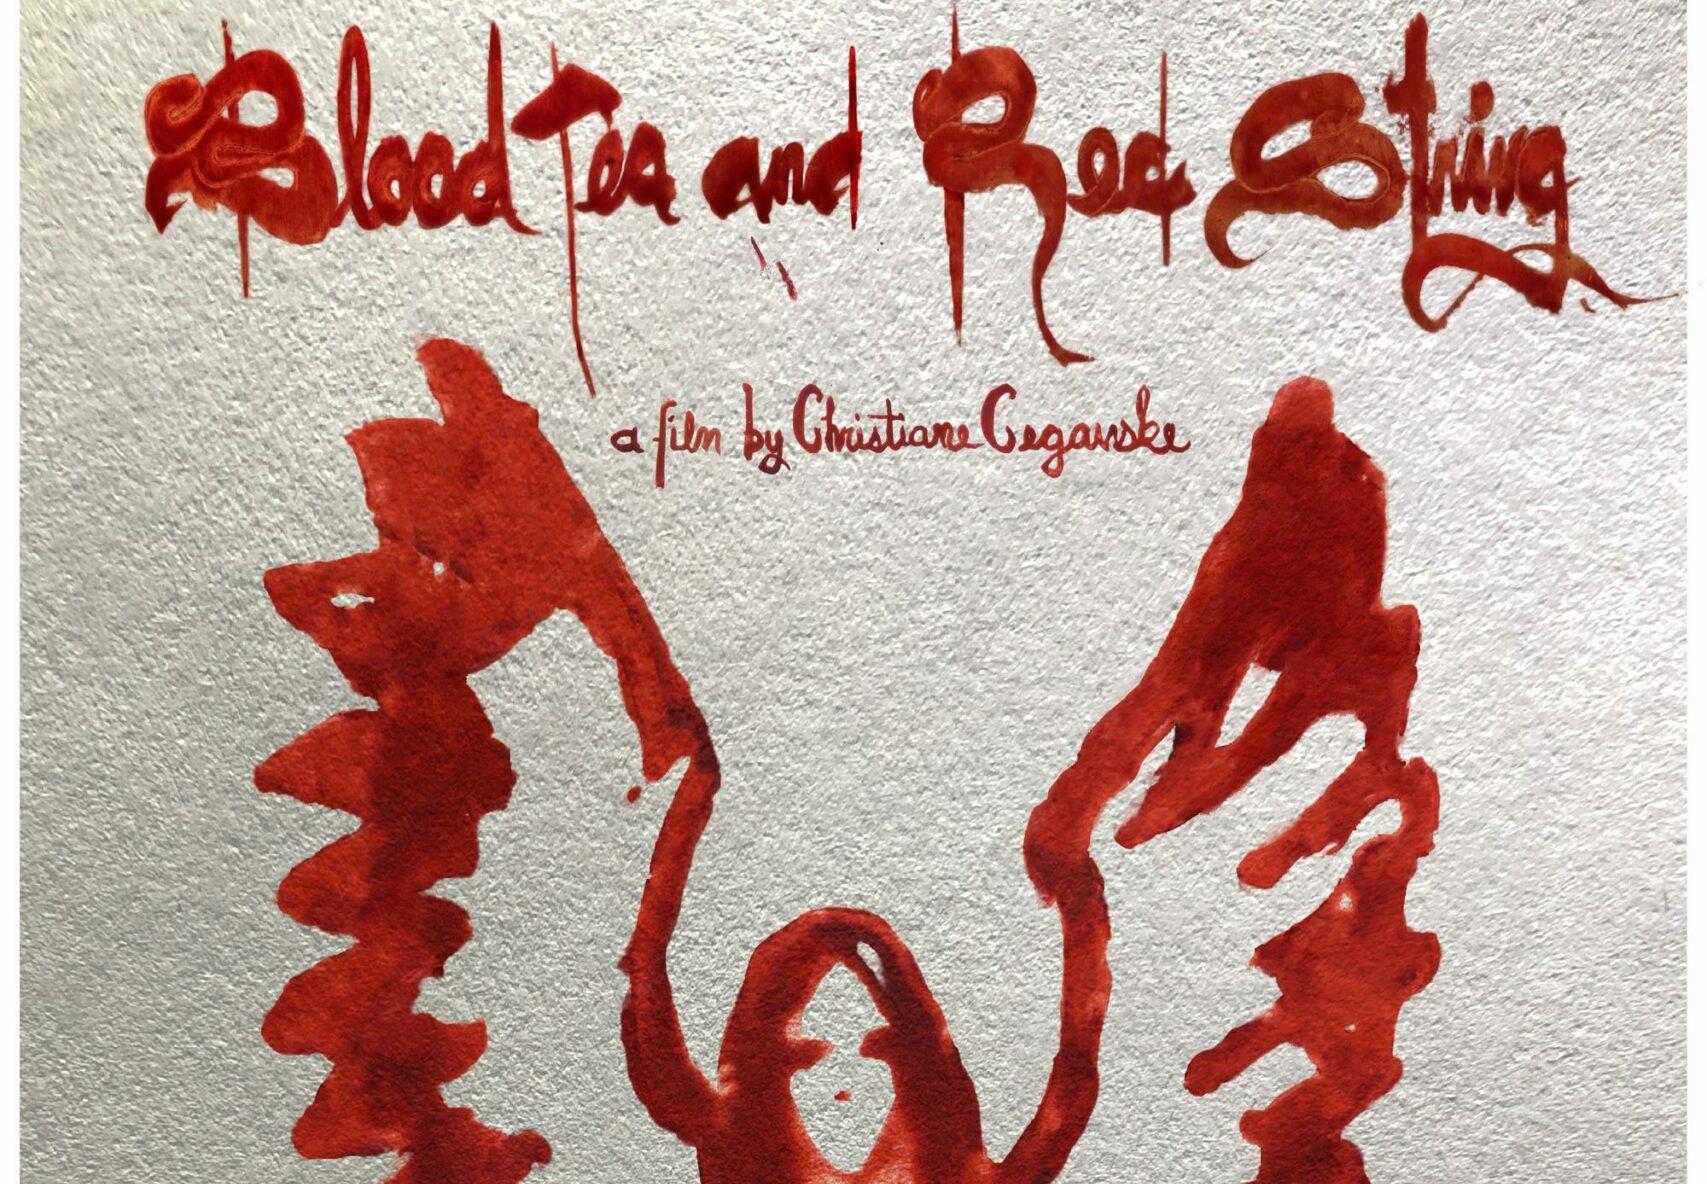 Unseen Cinema – Blood Tea and Red String